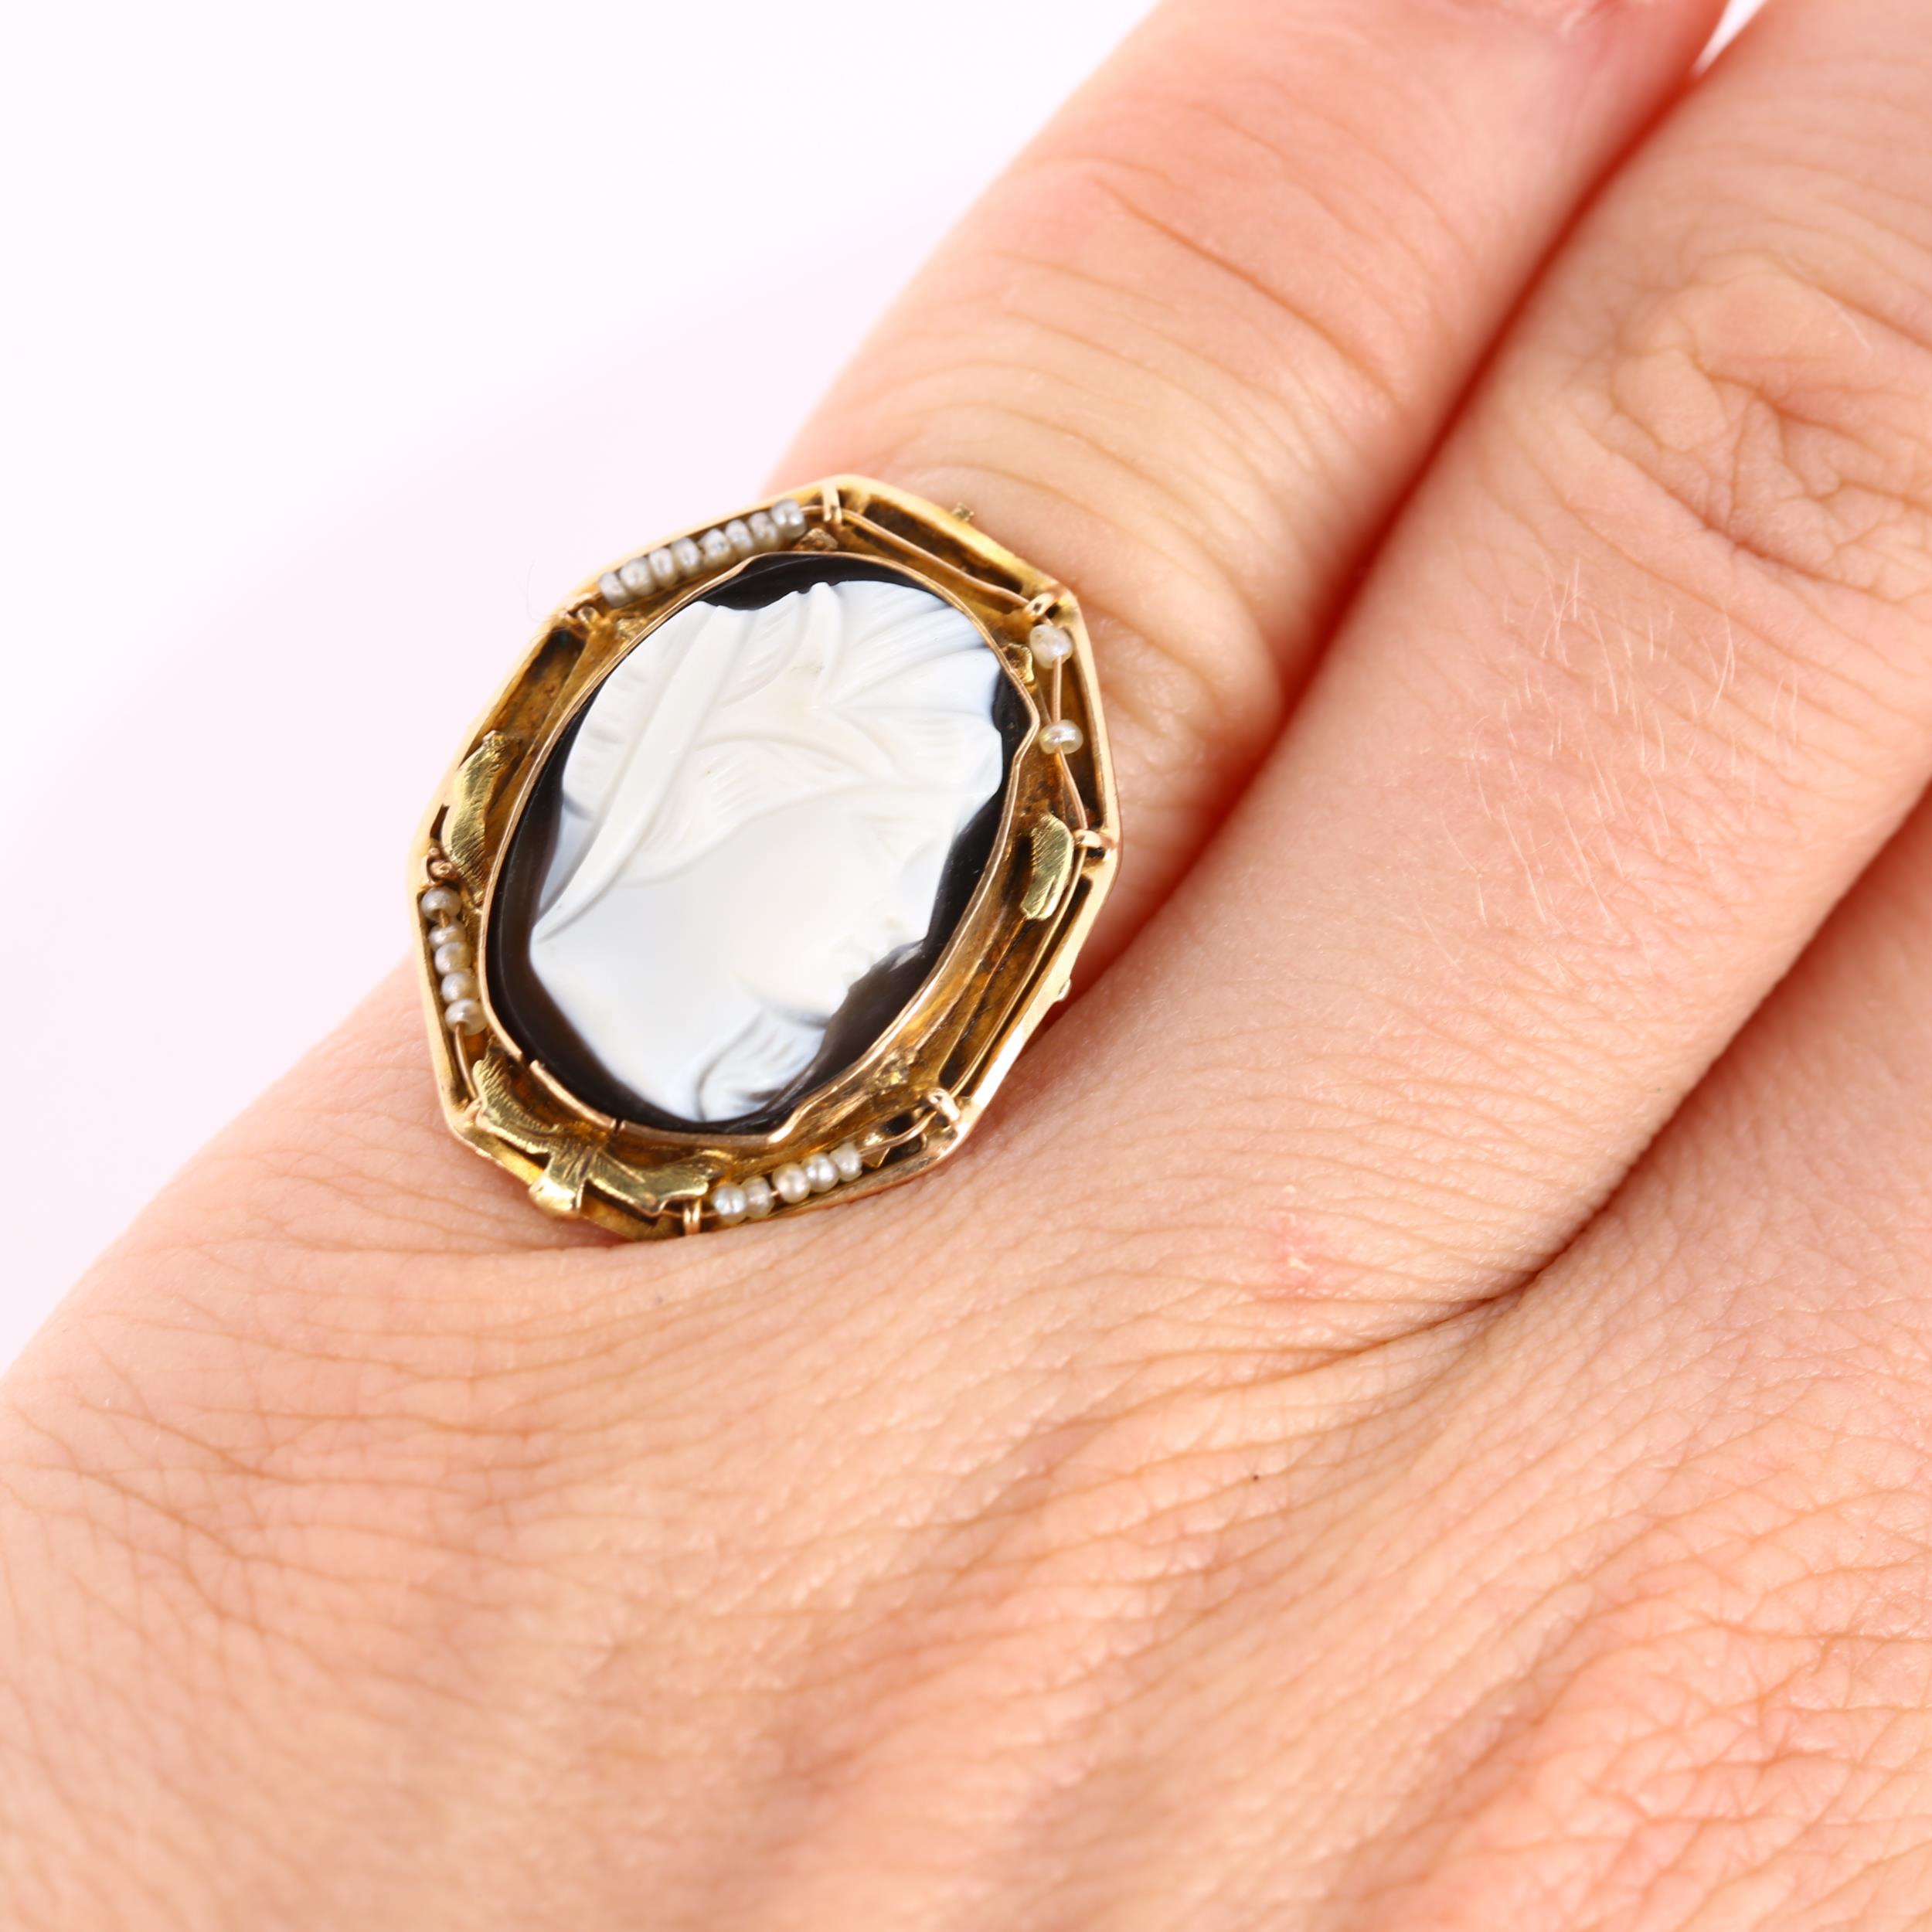 An Antique hardstone cameo ring, 9ct gold settings with relief carved panel depicting female profile - Image 4 of 4